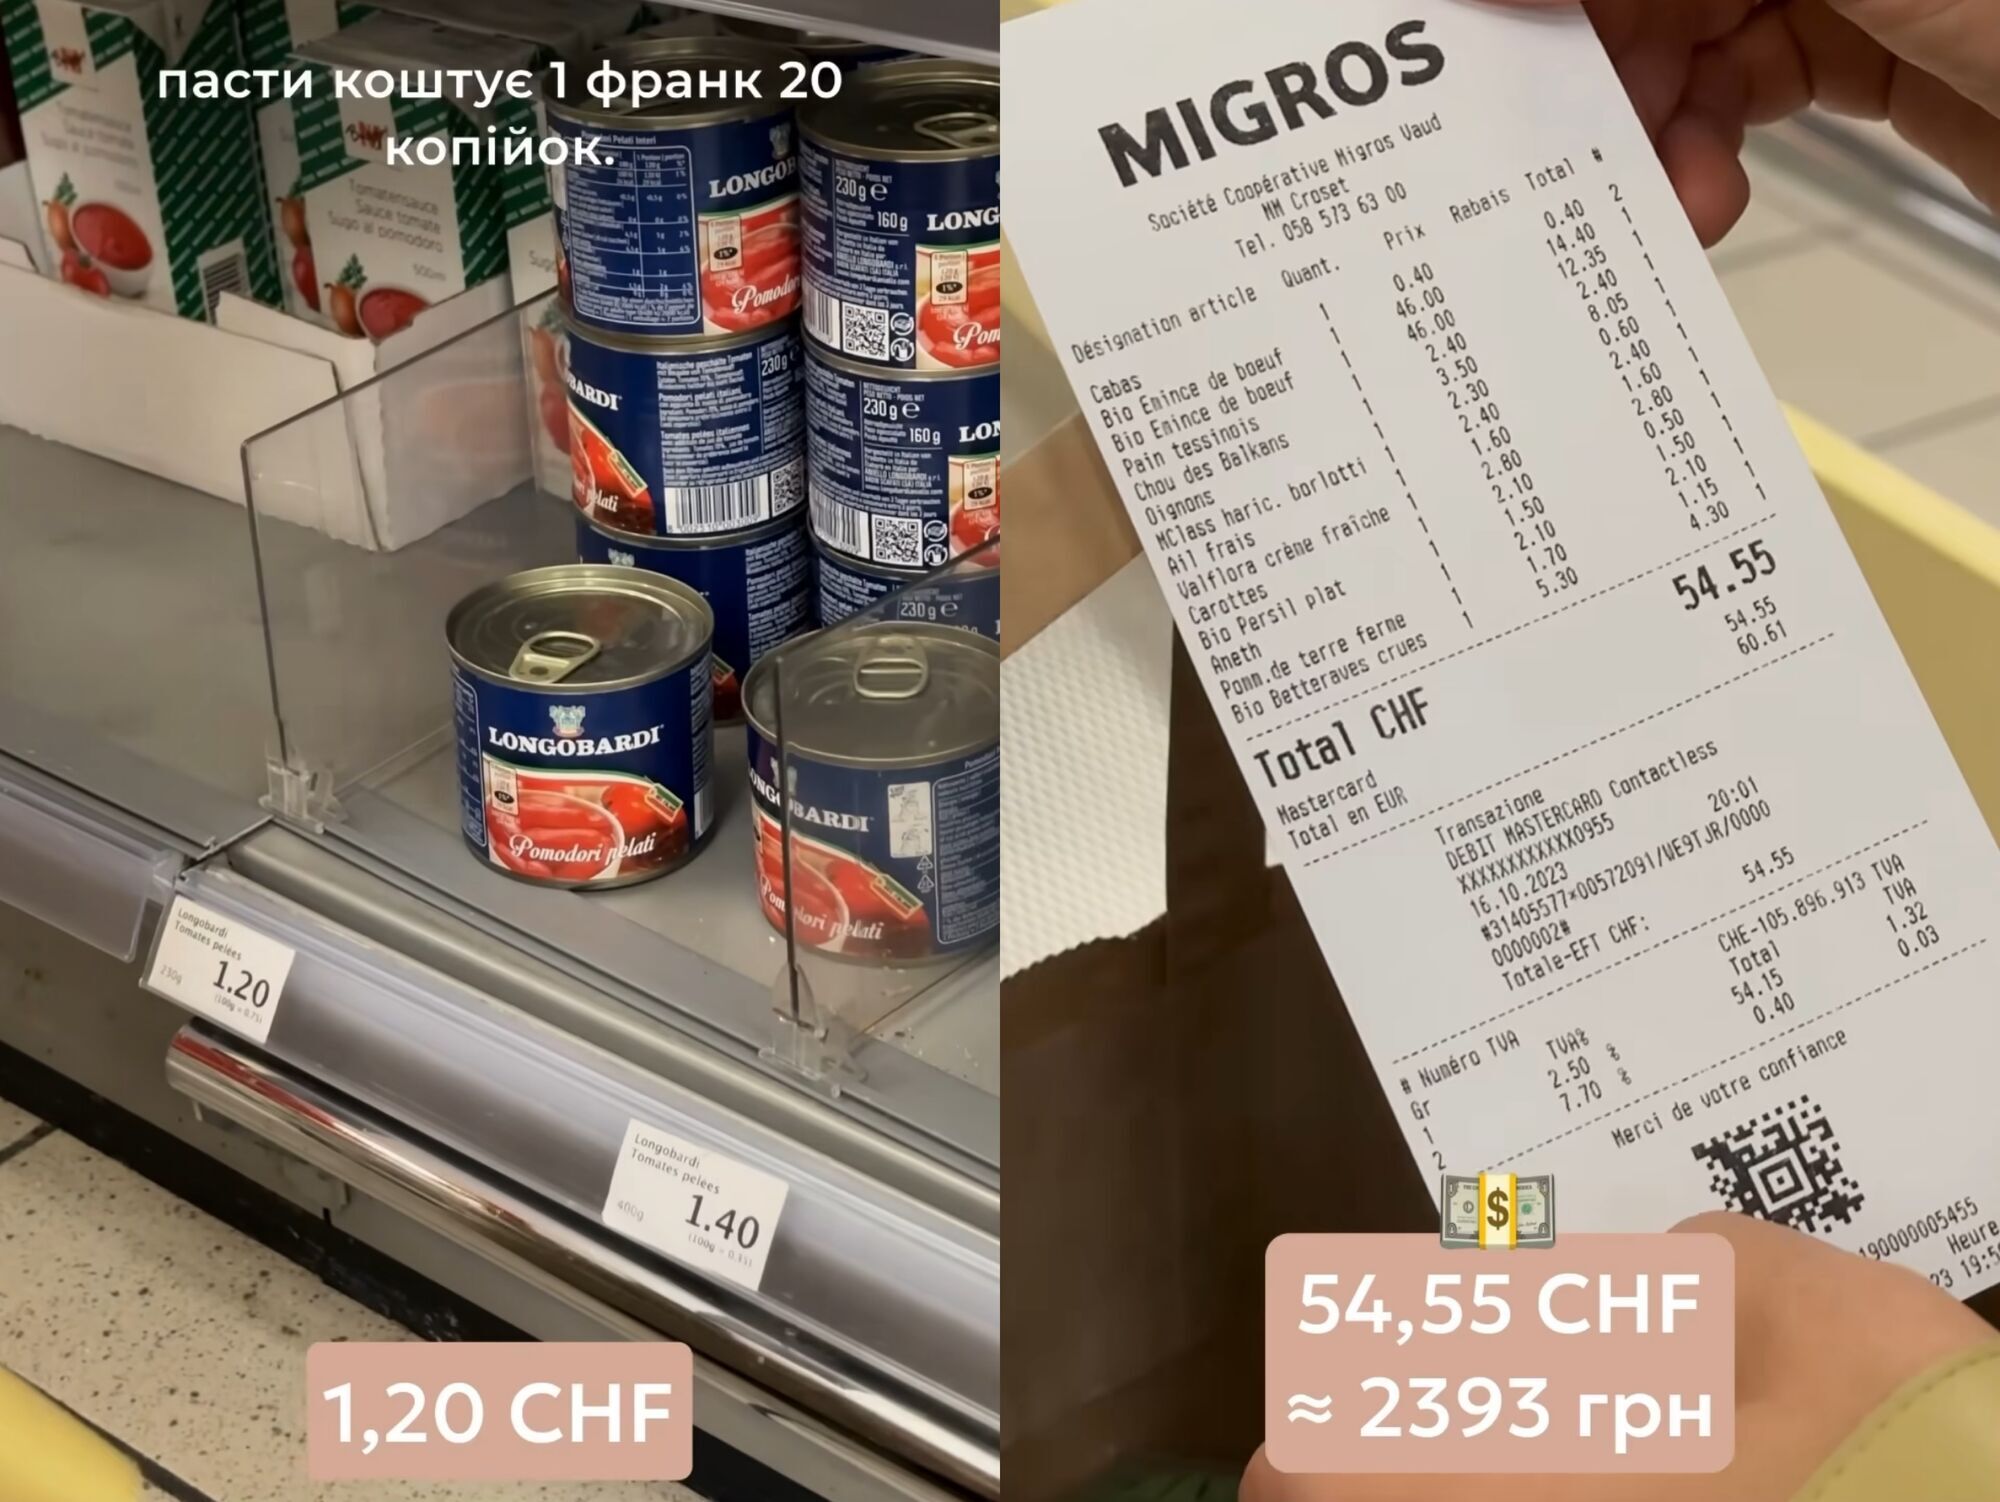 Ivanna Onofriychuk filmed a video from a supermarket in Switzerland, where only cabbage cost 350 UAH